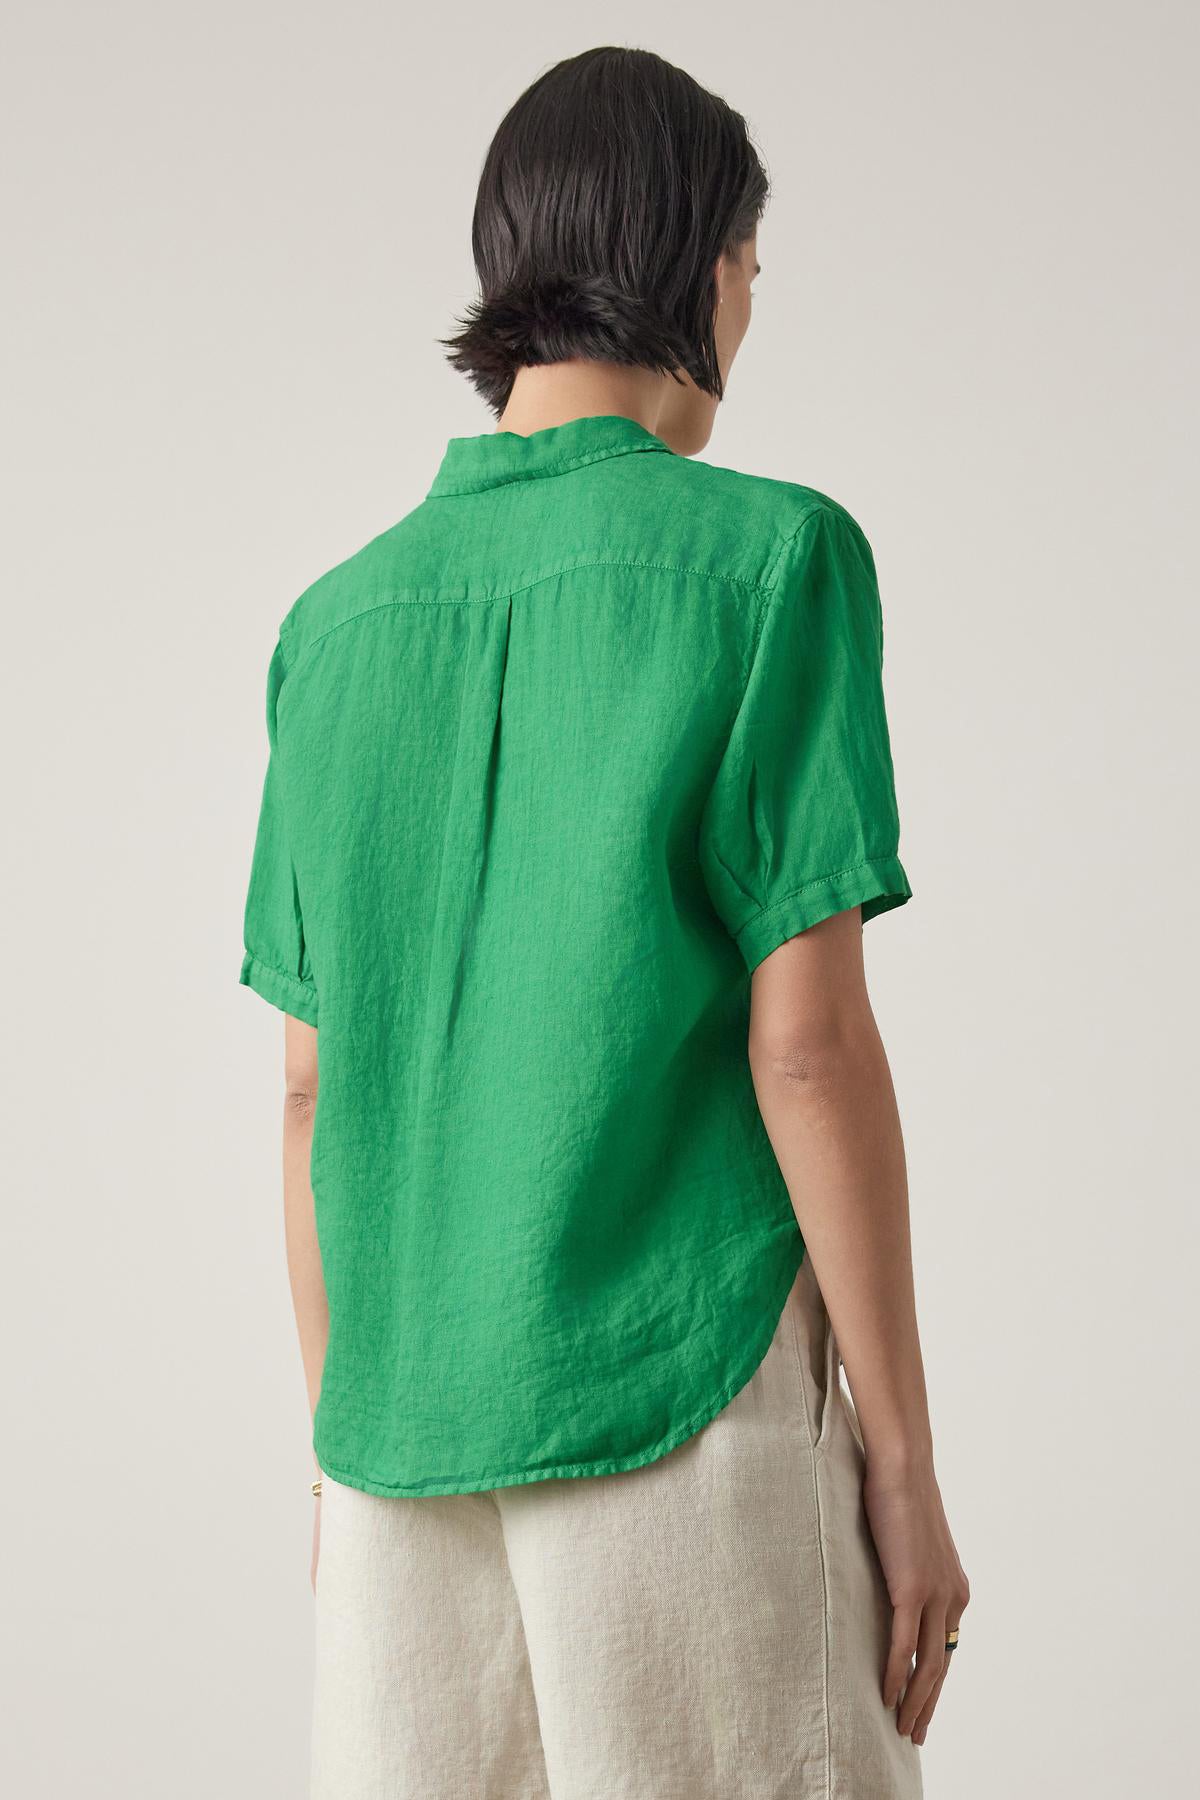 Woman facing away from the camera, wearing a green short-sleeved CLAREMONT LINEN SHIRT by Velvet by Jenny Graham and beige trousers.-36753623515329